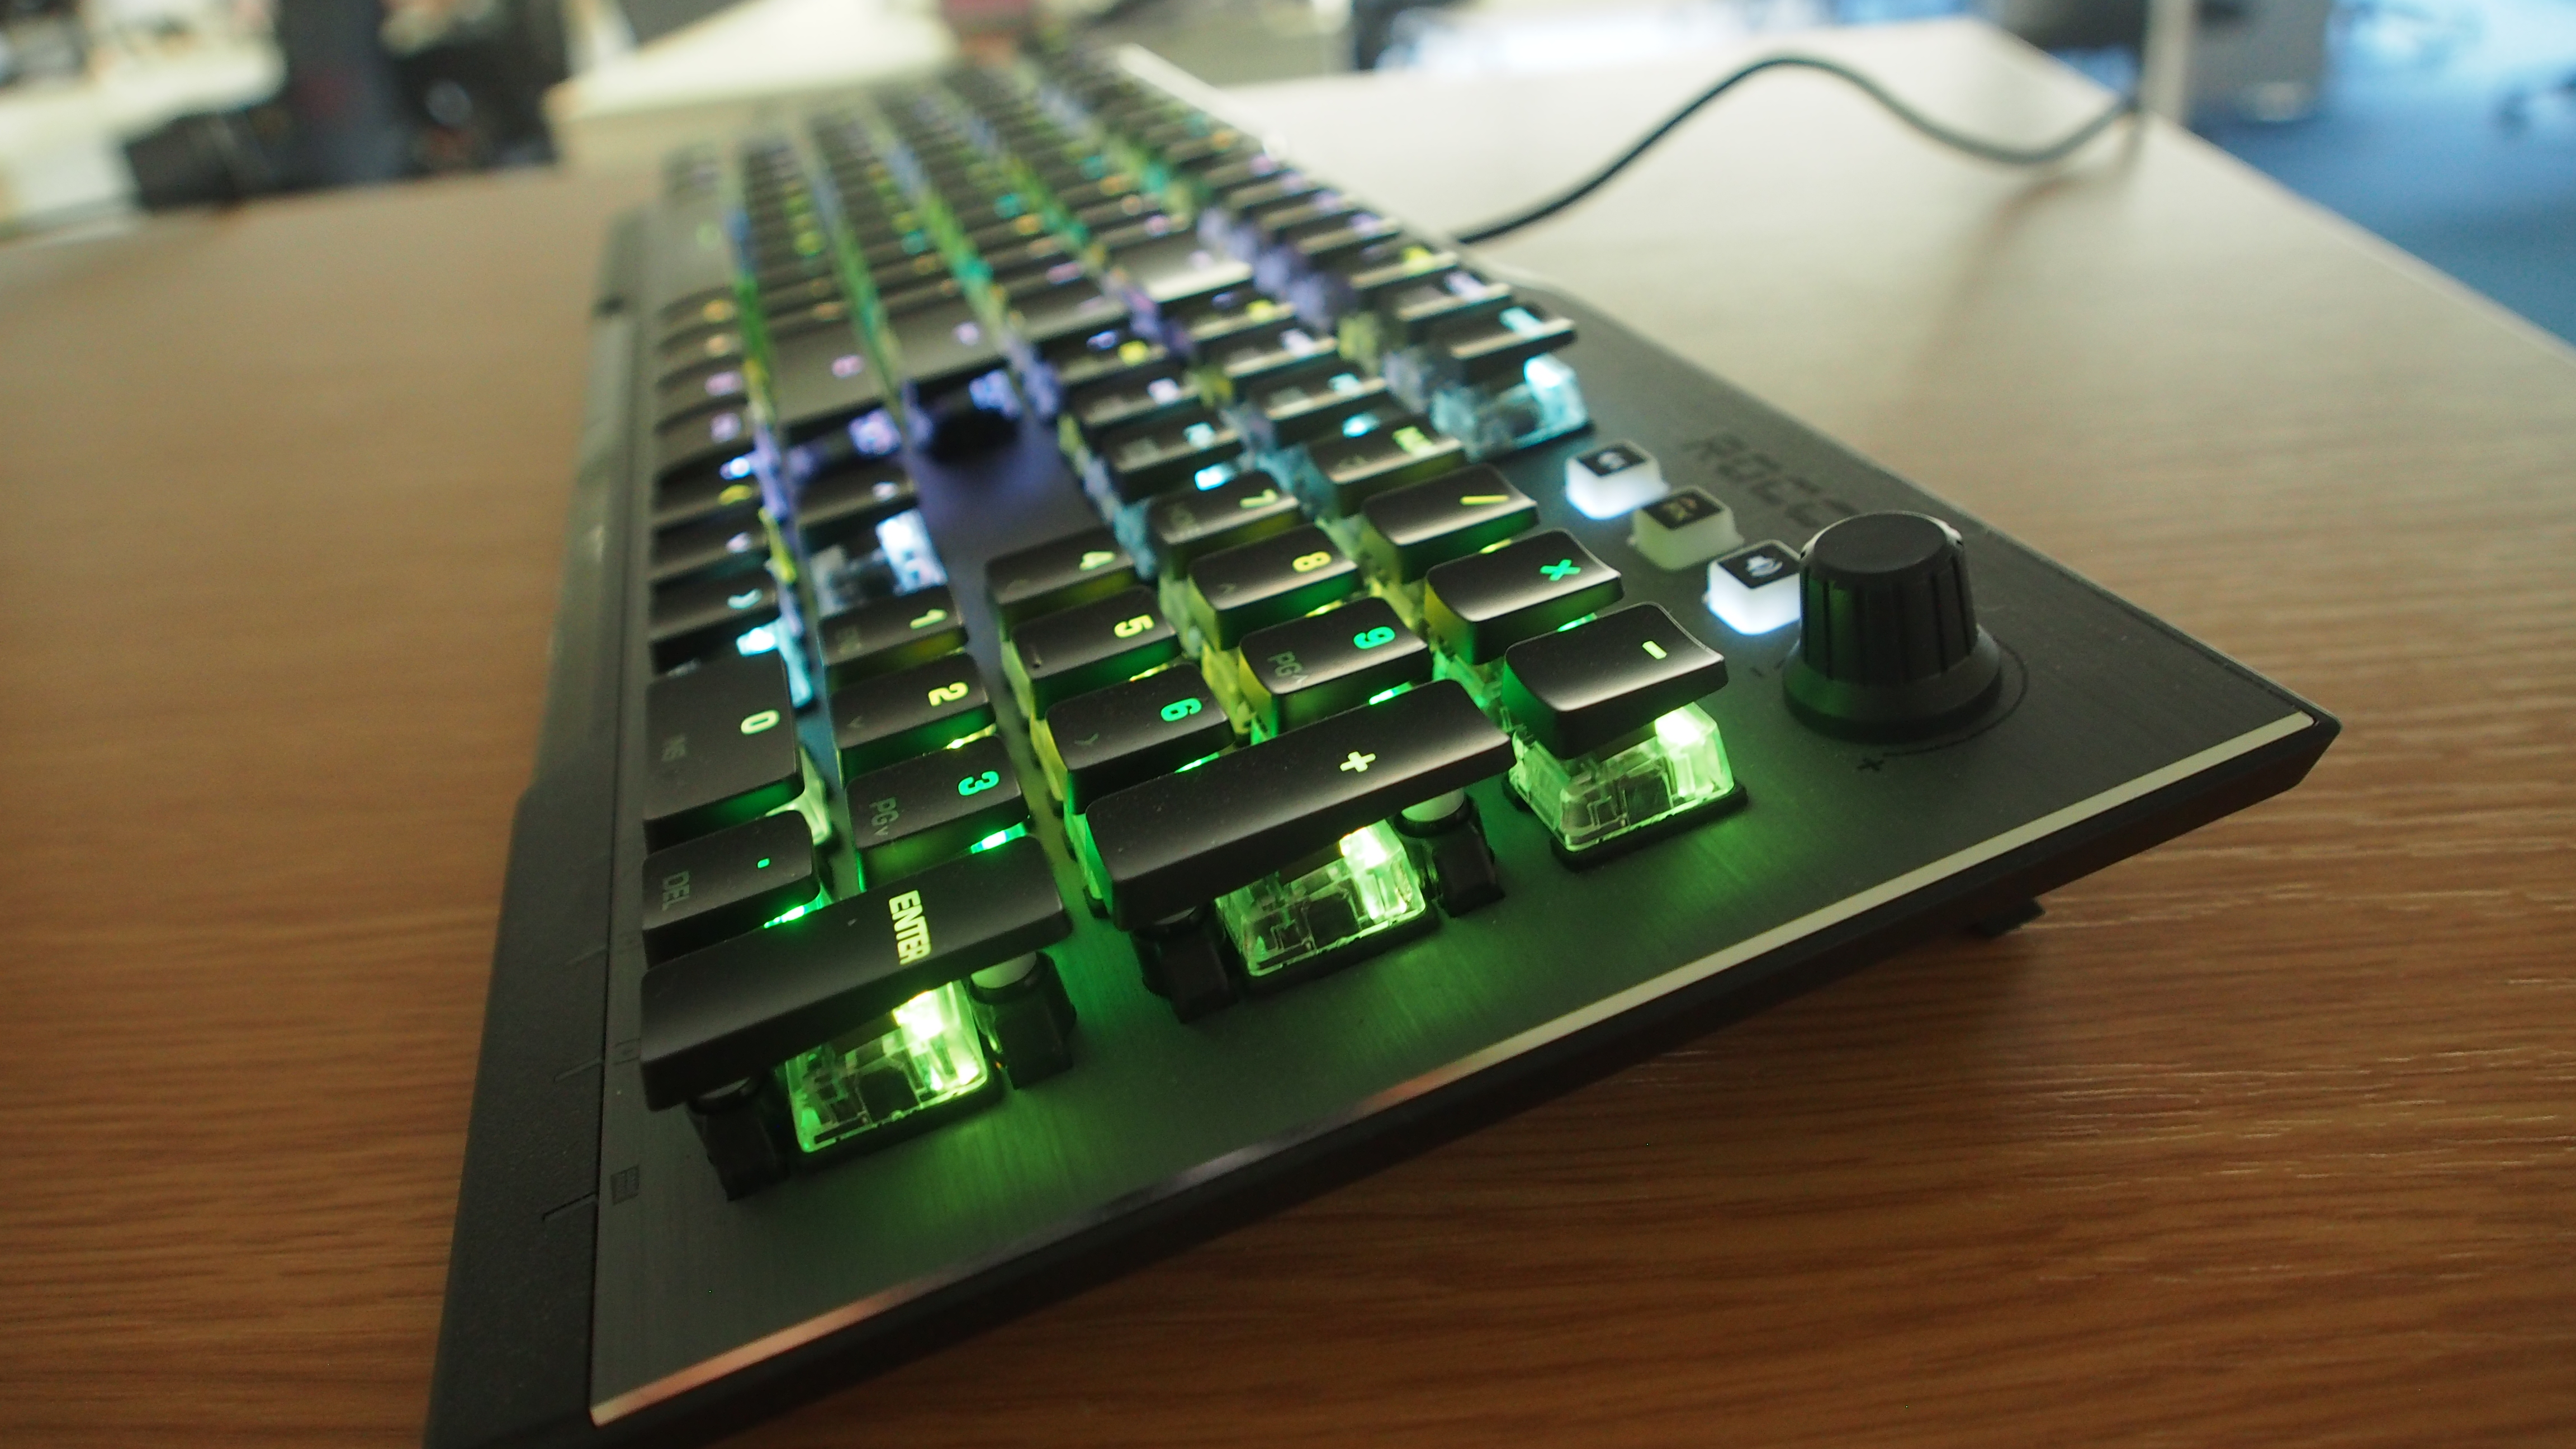 Roccat Vulcan 120 Aimo Keyboard - Full Review and Benchmarks